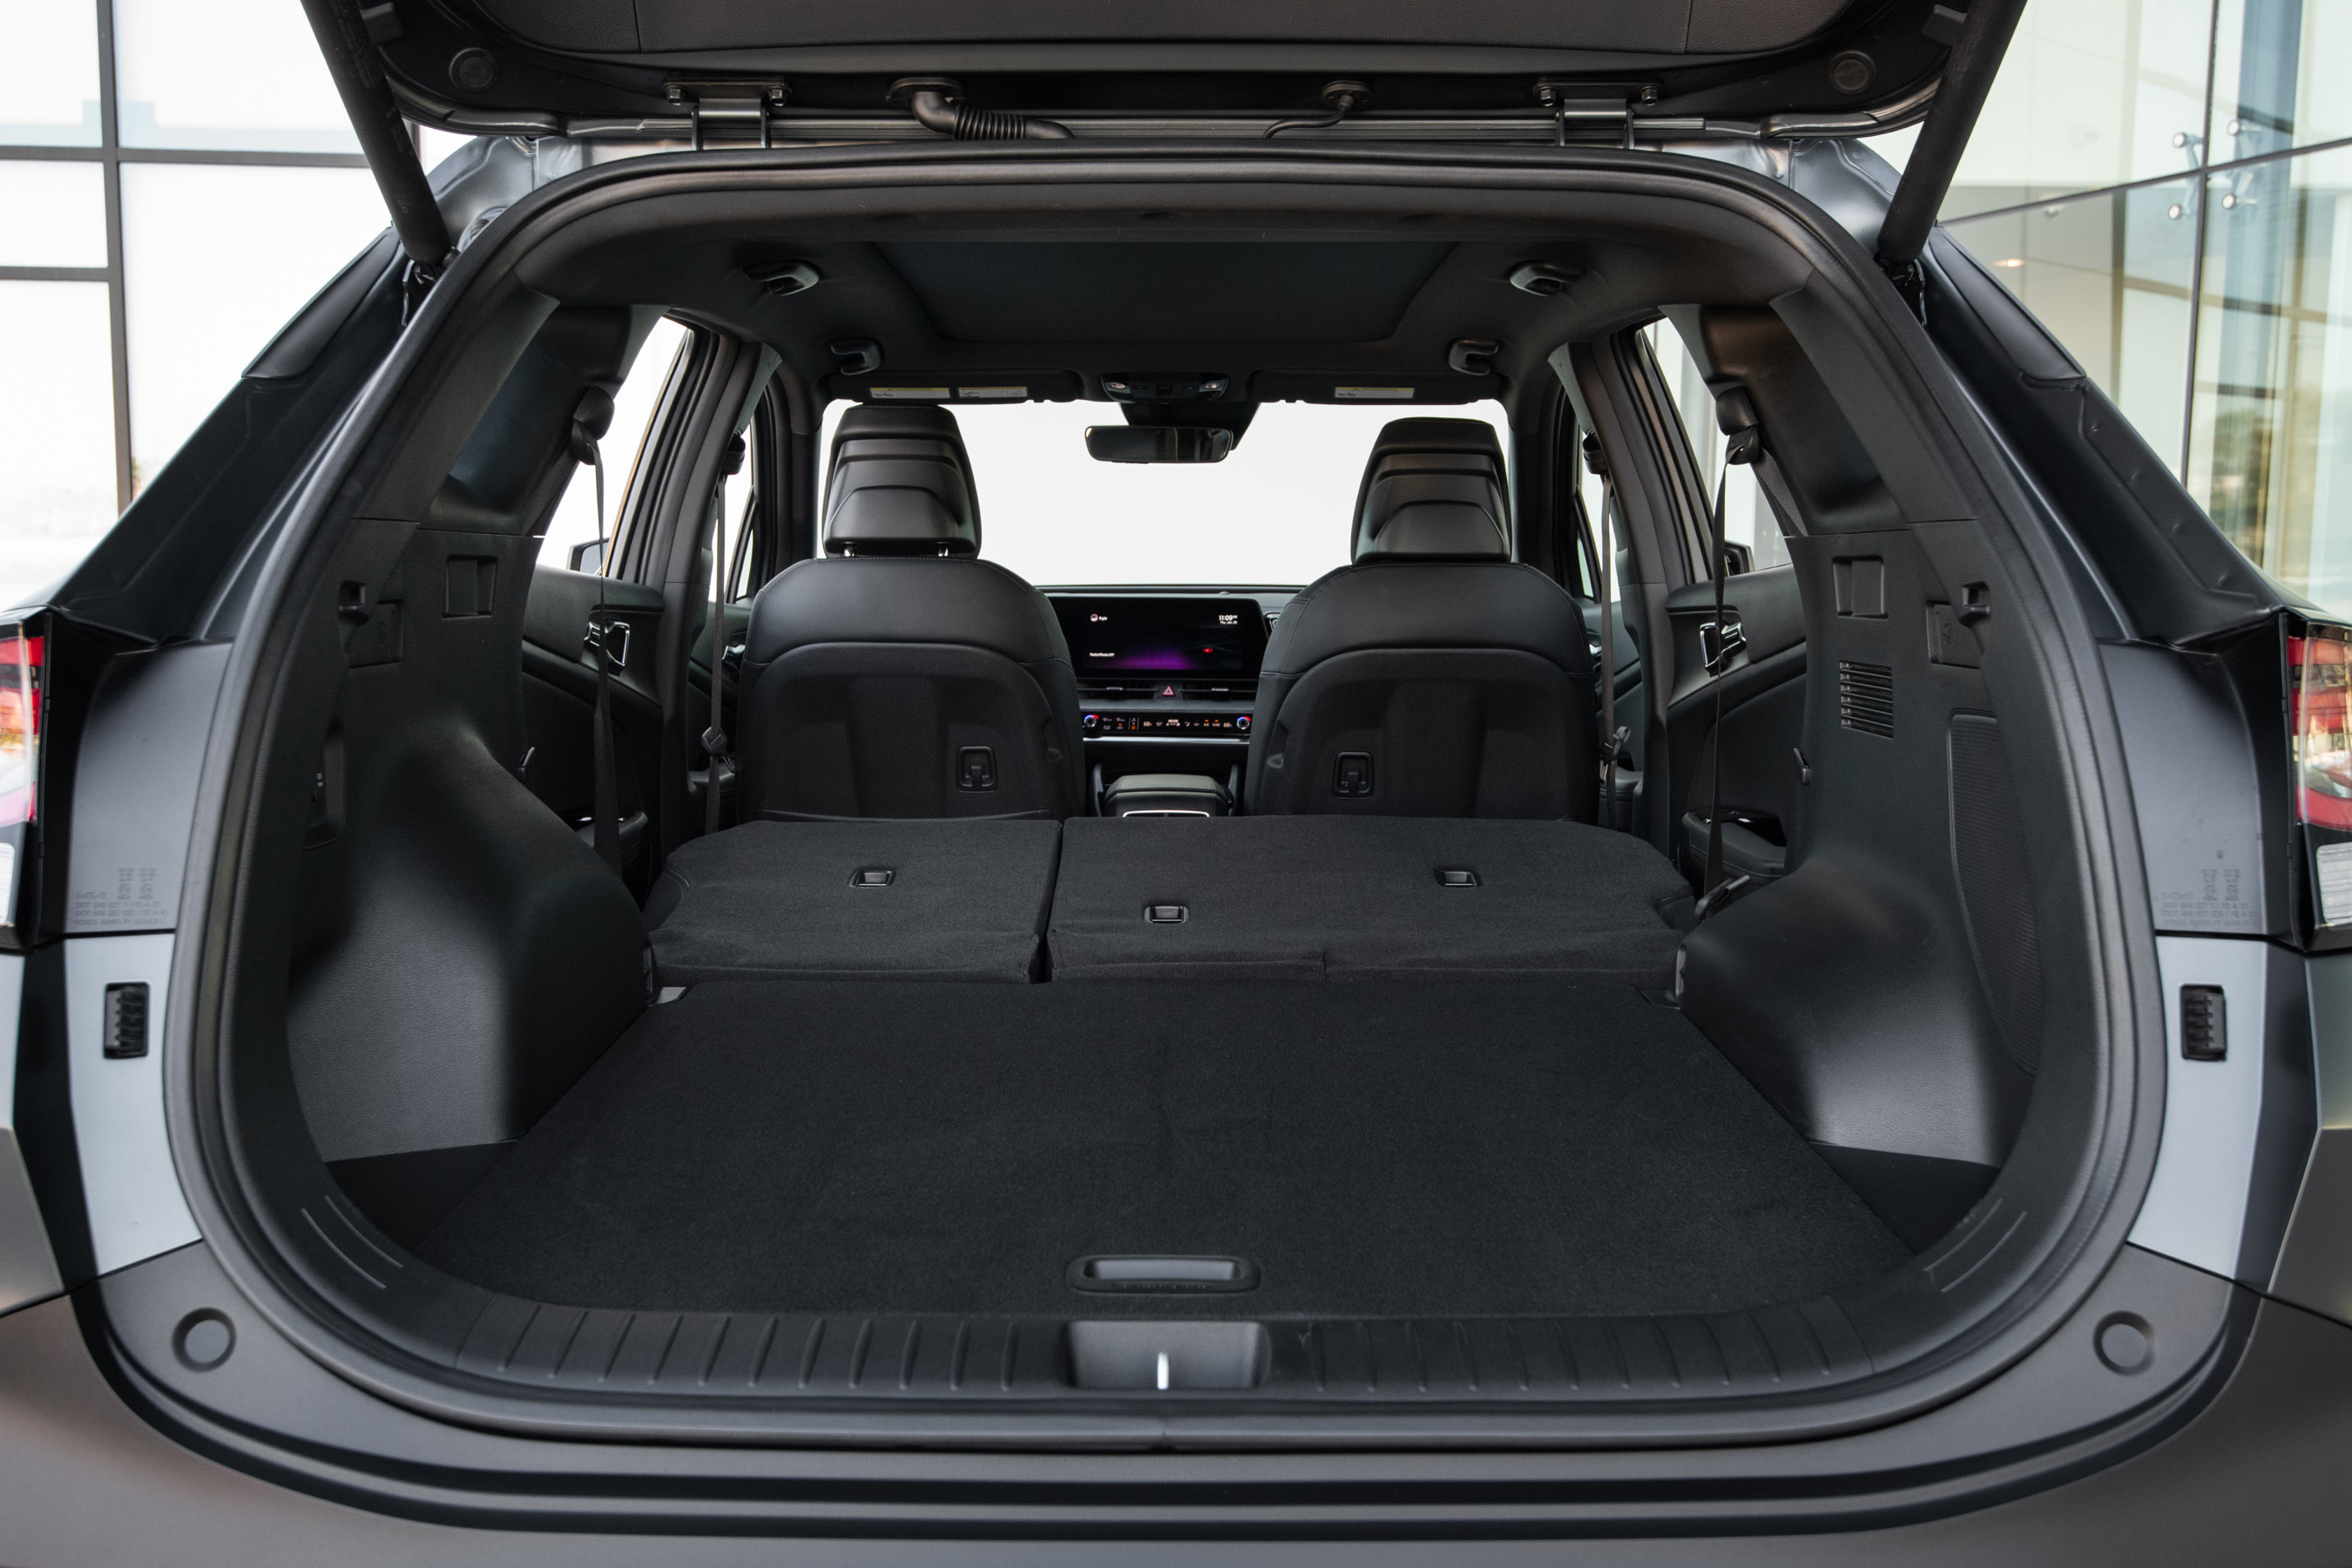 The 2023 Sportage delivers more of everything for today’s savvy, adventurous and eco-conscious consumers, including outstanding efficiency, best-in-class rear legroom and rear cargo capacity as well as numerous standard Advanced Driver Assistance features.